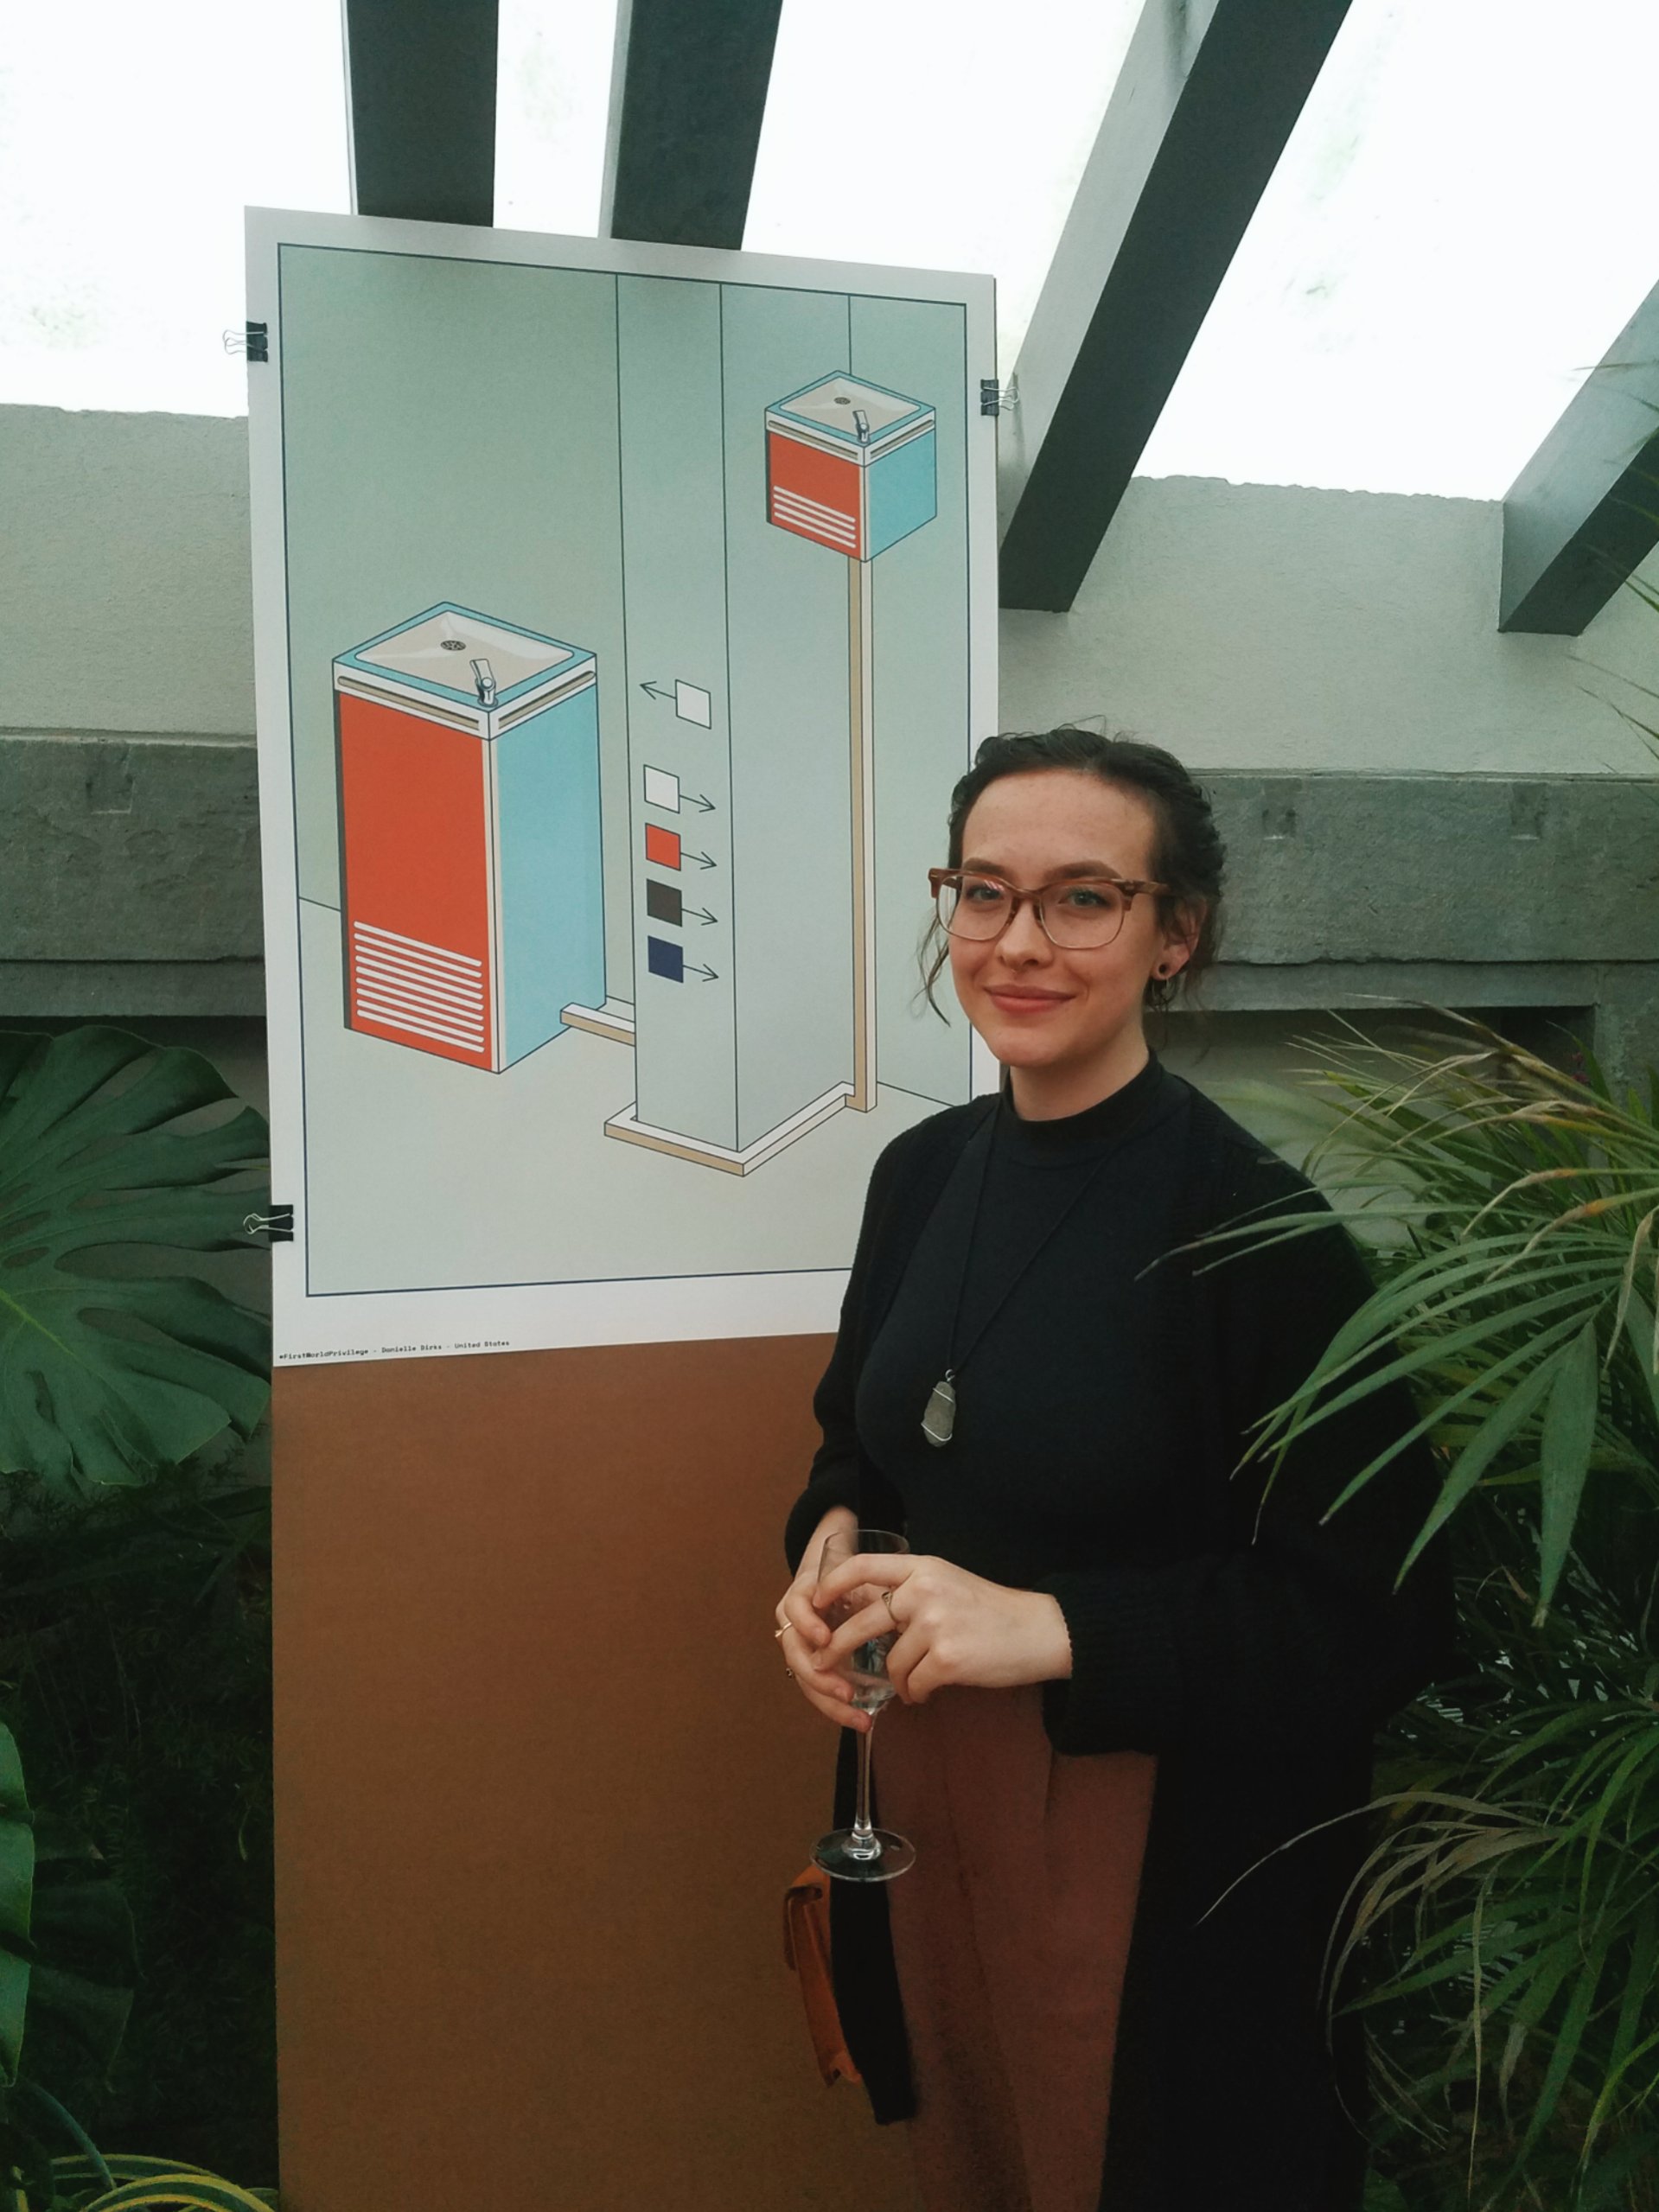 Danielle Dirks with poster featured in the Shaping the Future exhibition in Italy.  